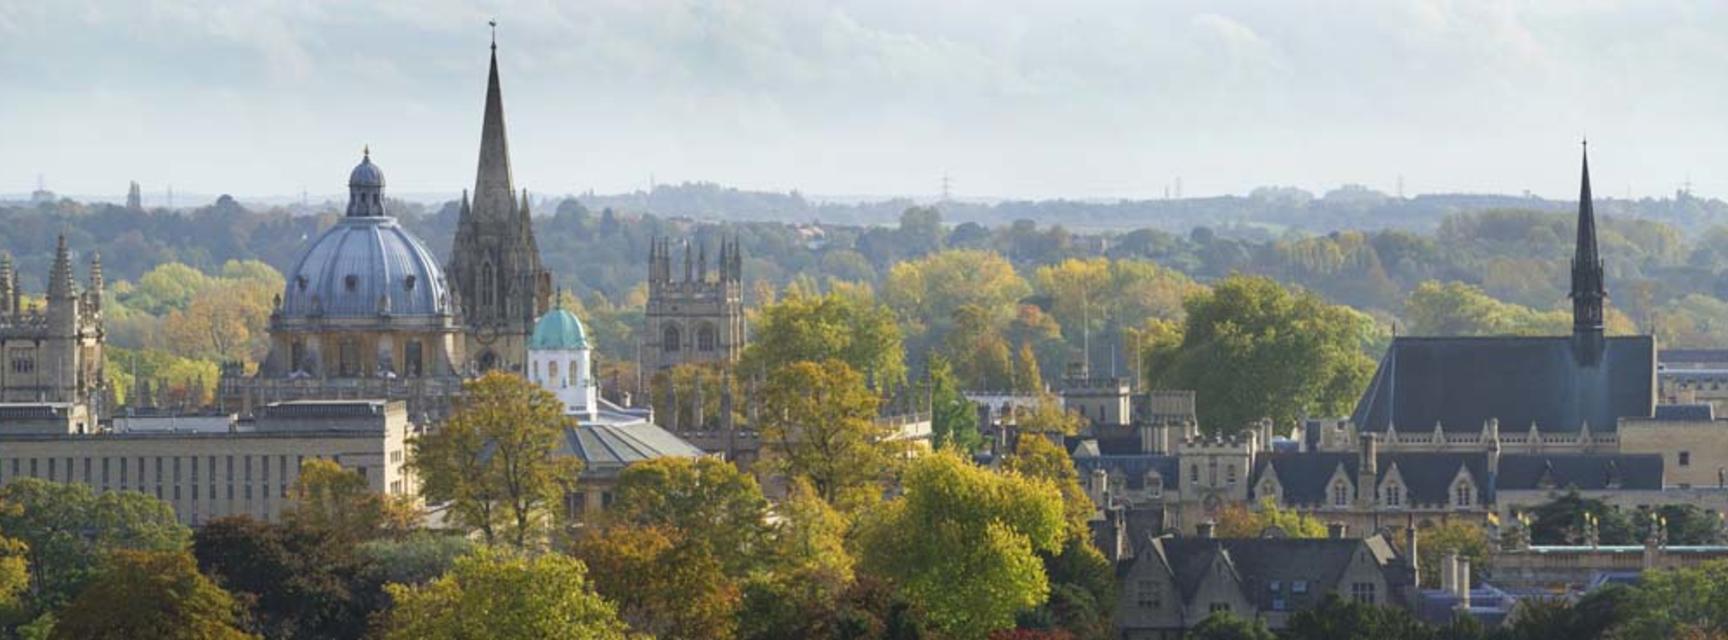 Photo of the Oxford spires